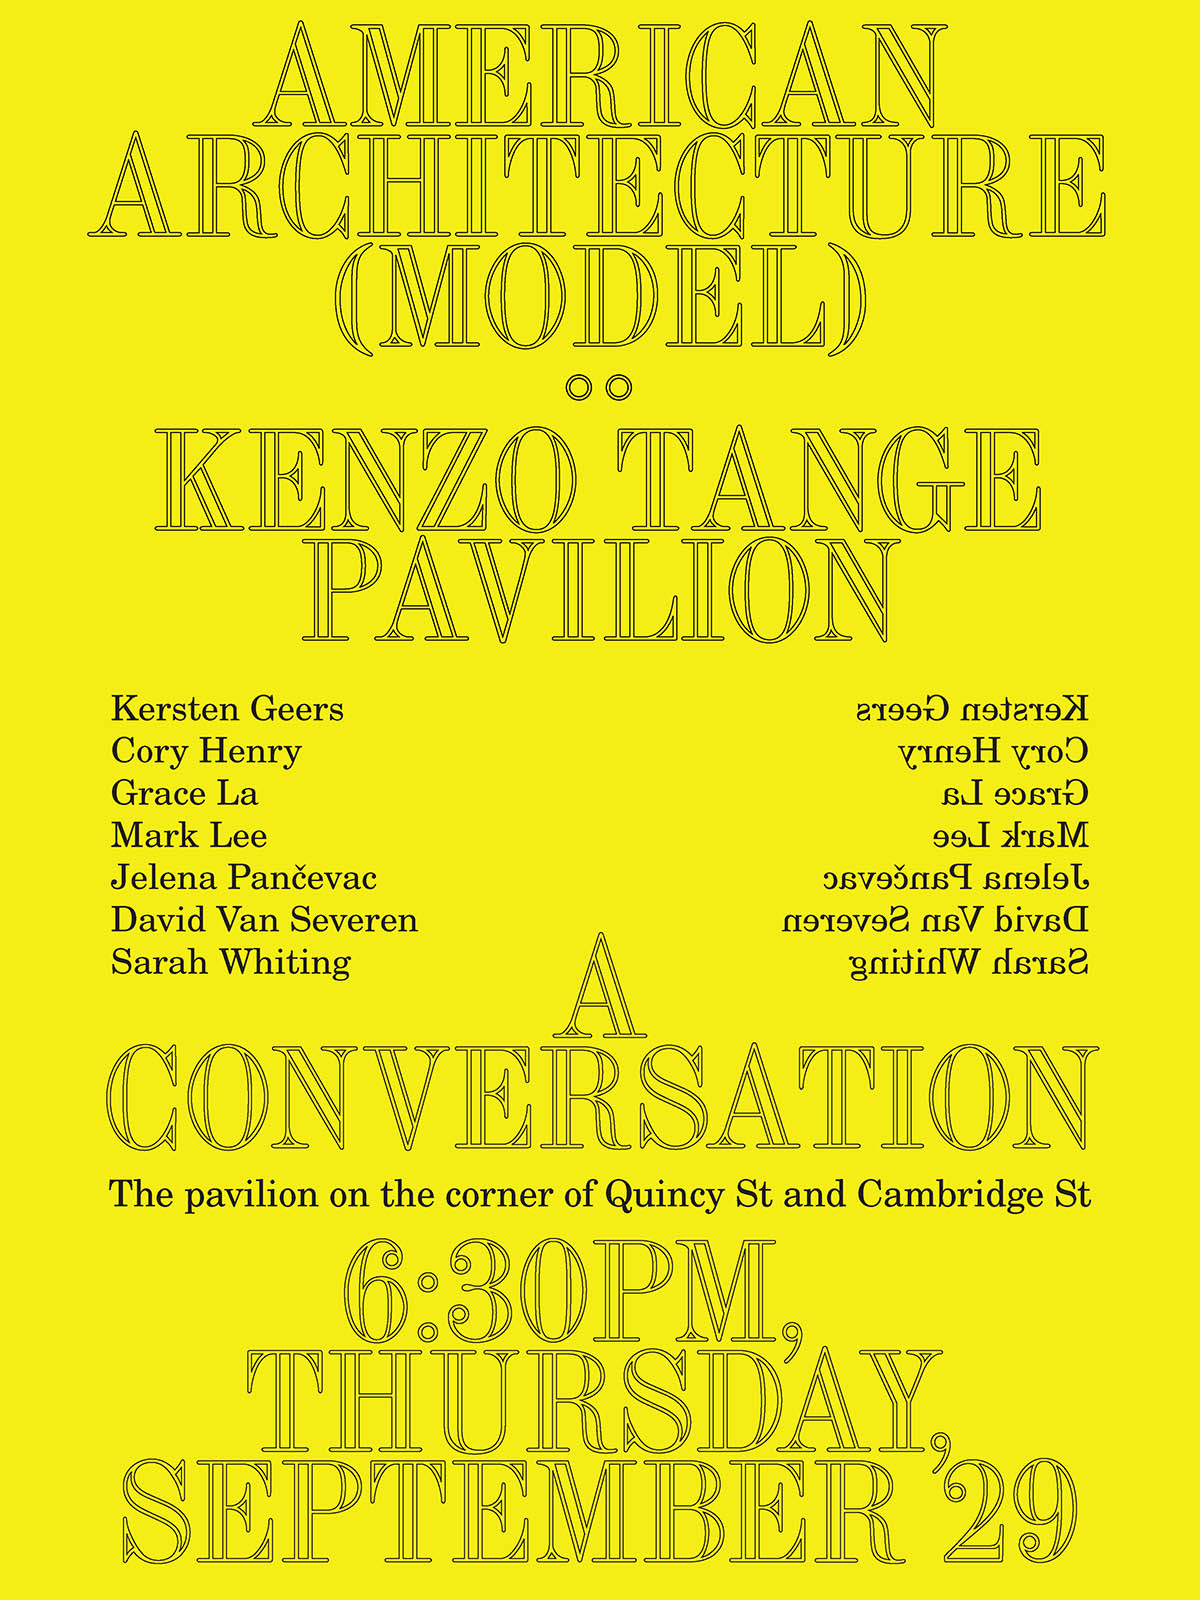 Yellow poster with black text advertising the event about the Kenzo Tange Pavilion.